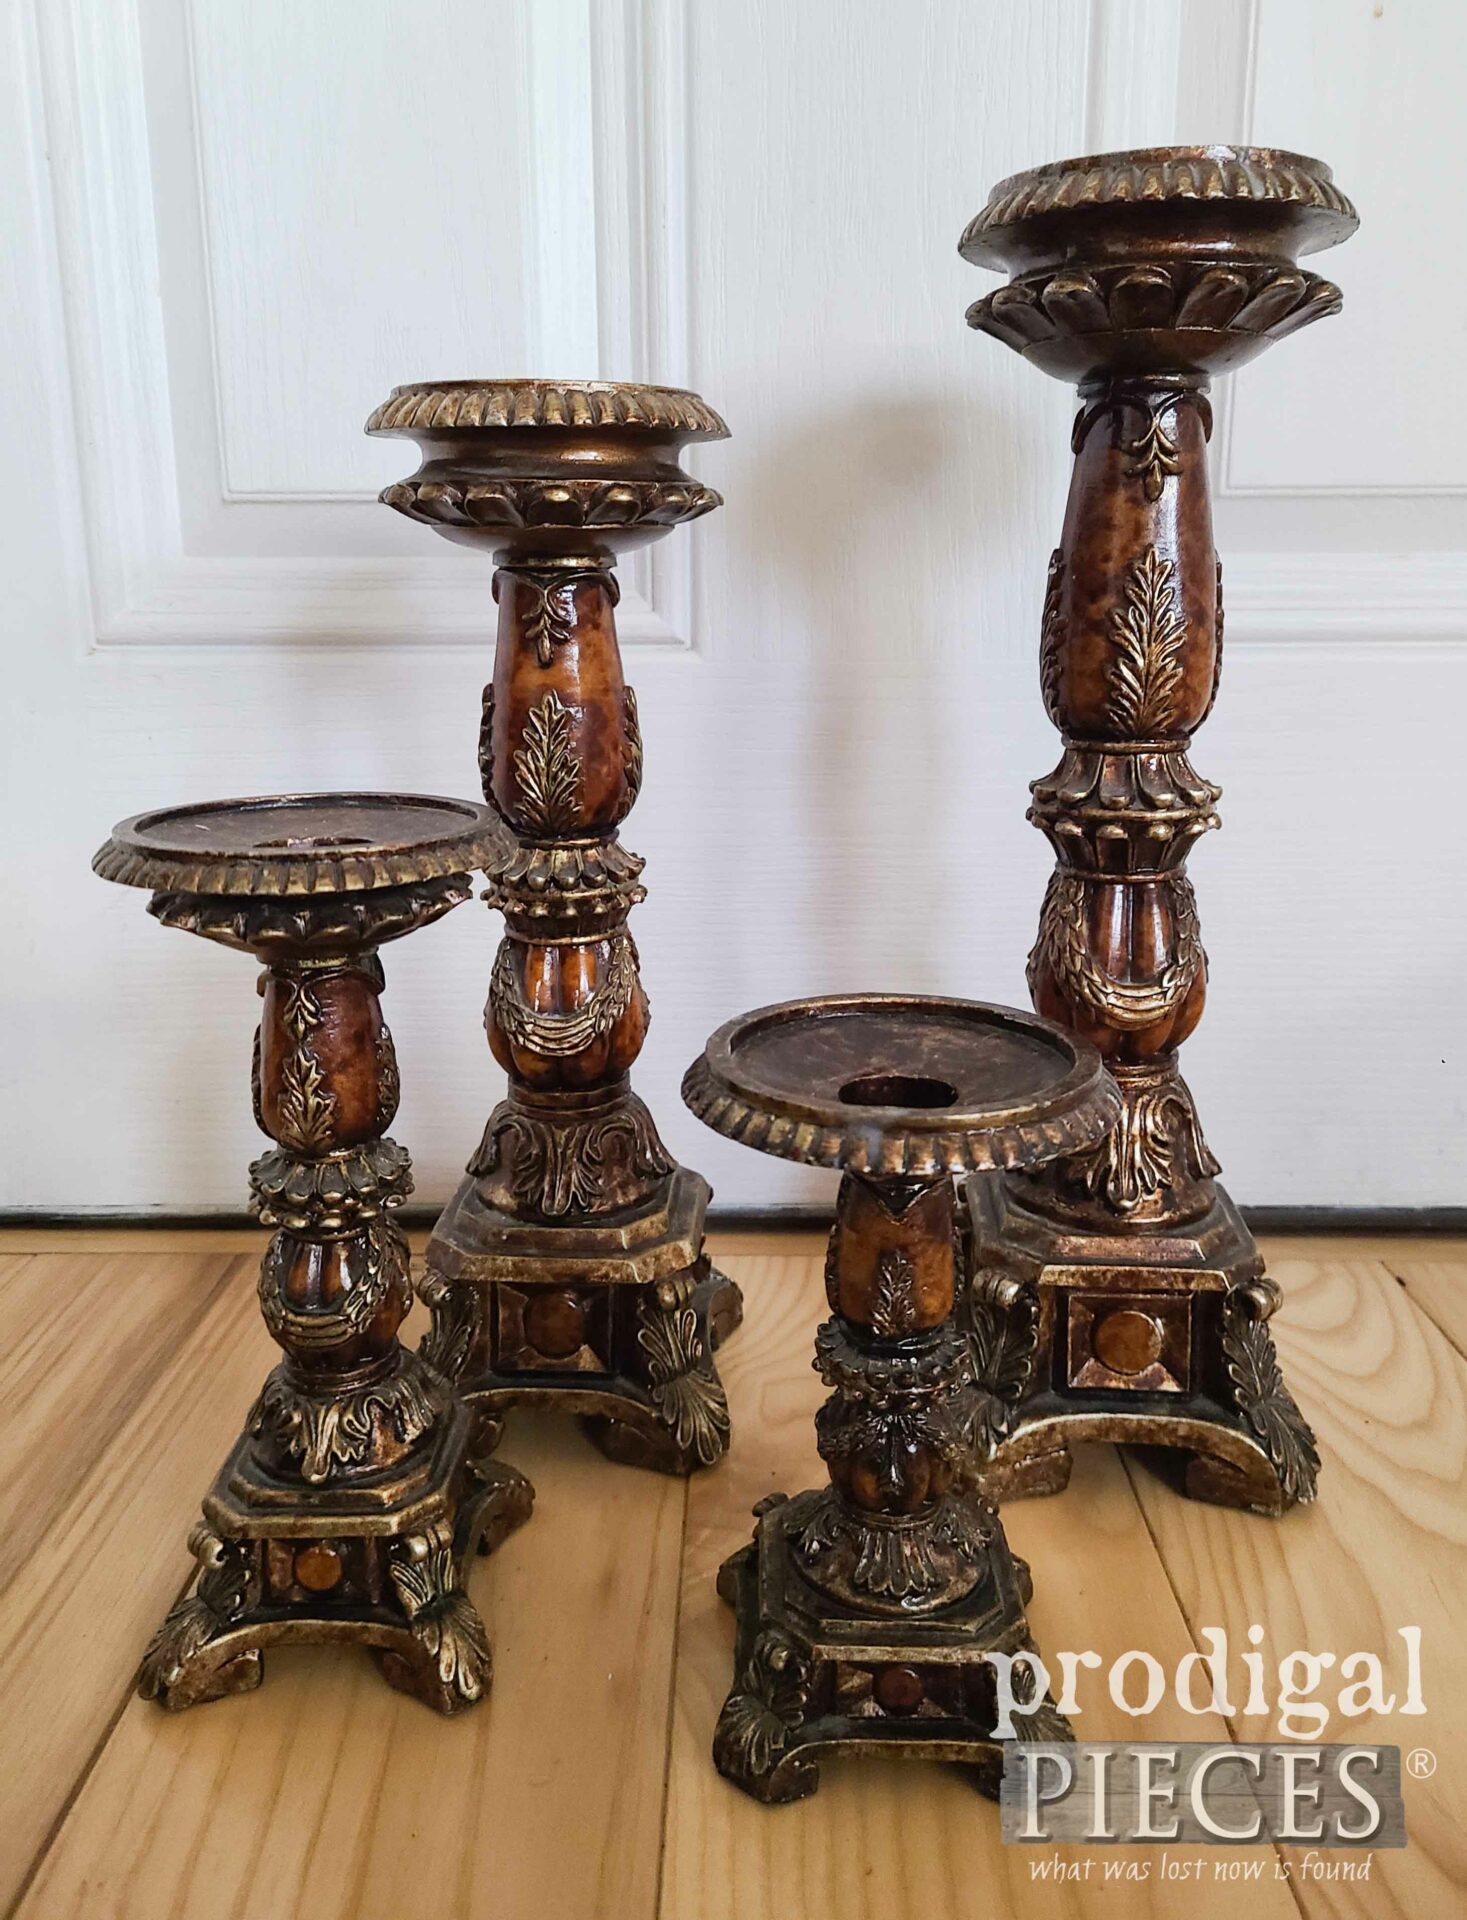 Thrifted Candlesticks Before Makeover by Prodigal Pieces | prodigalpieces.com #prodigalpieces